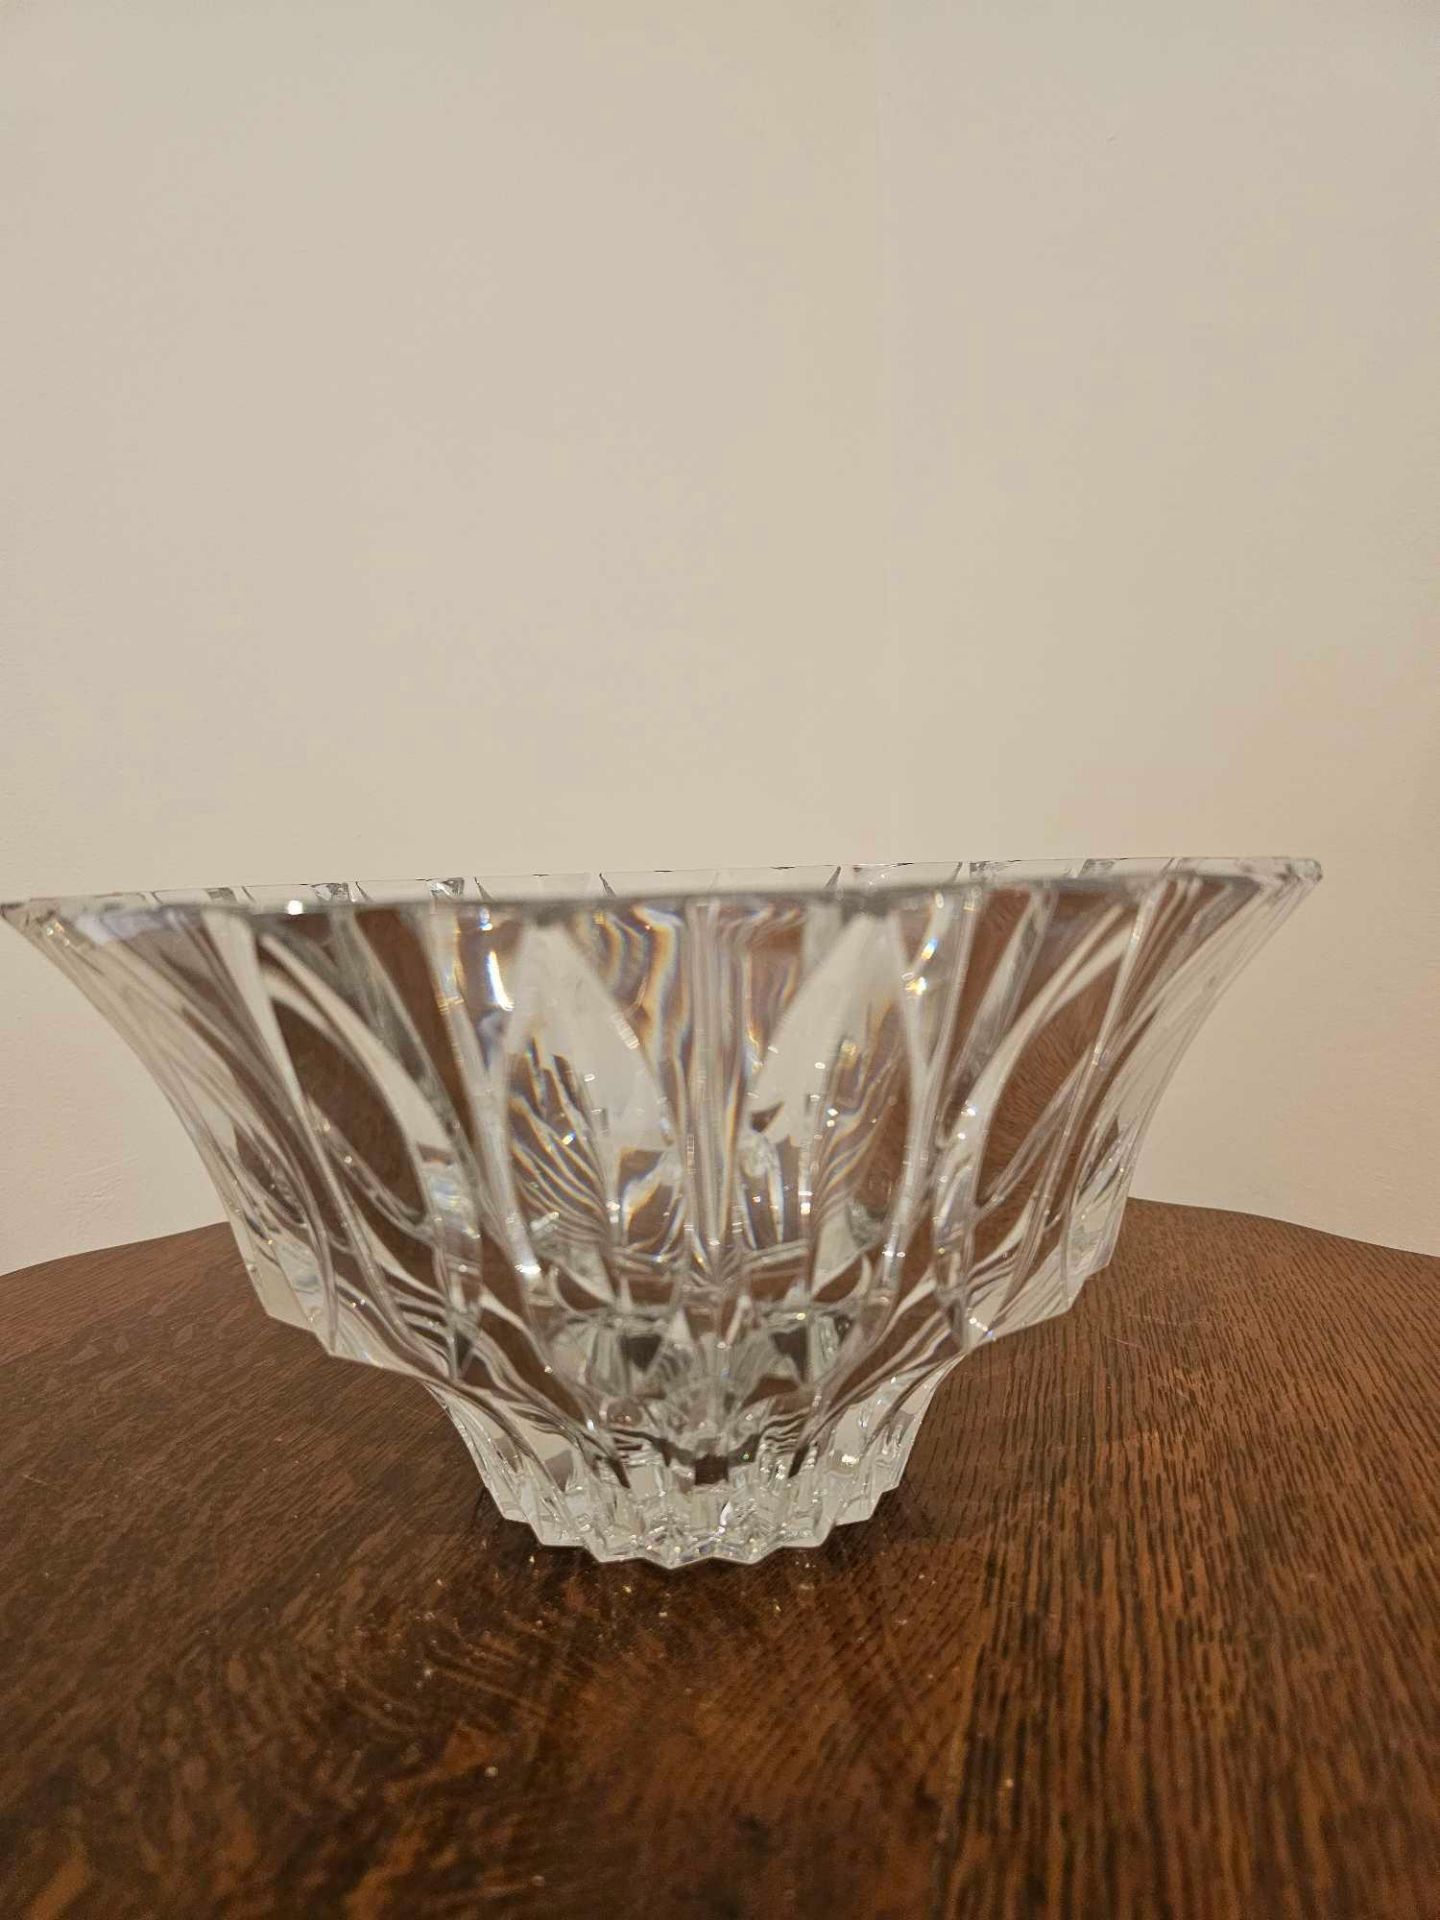 Faceted Cut Crystal Large Bowl 29 X 18cm - Image 5 of 7